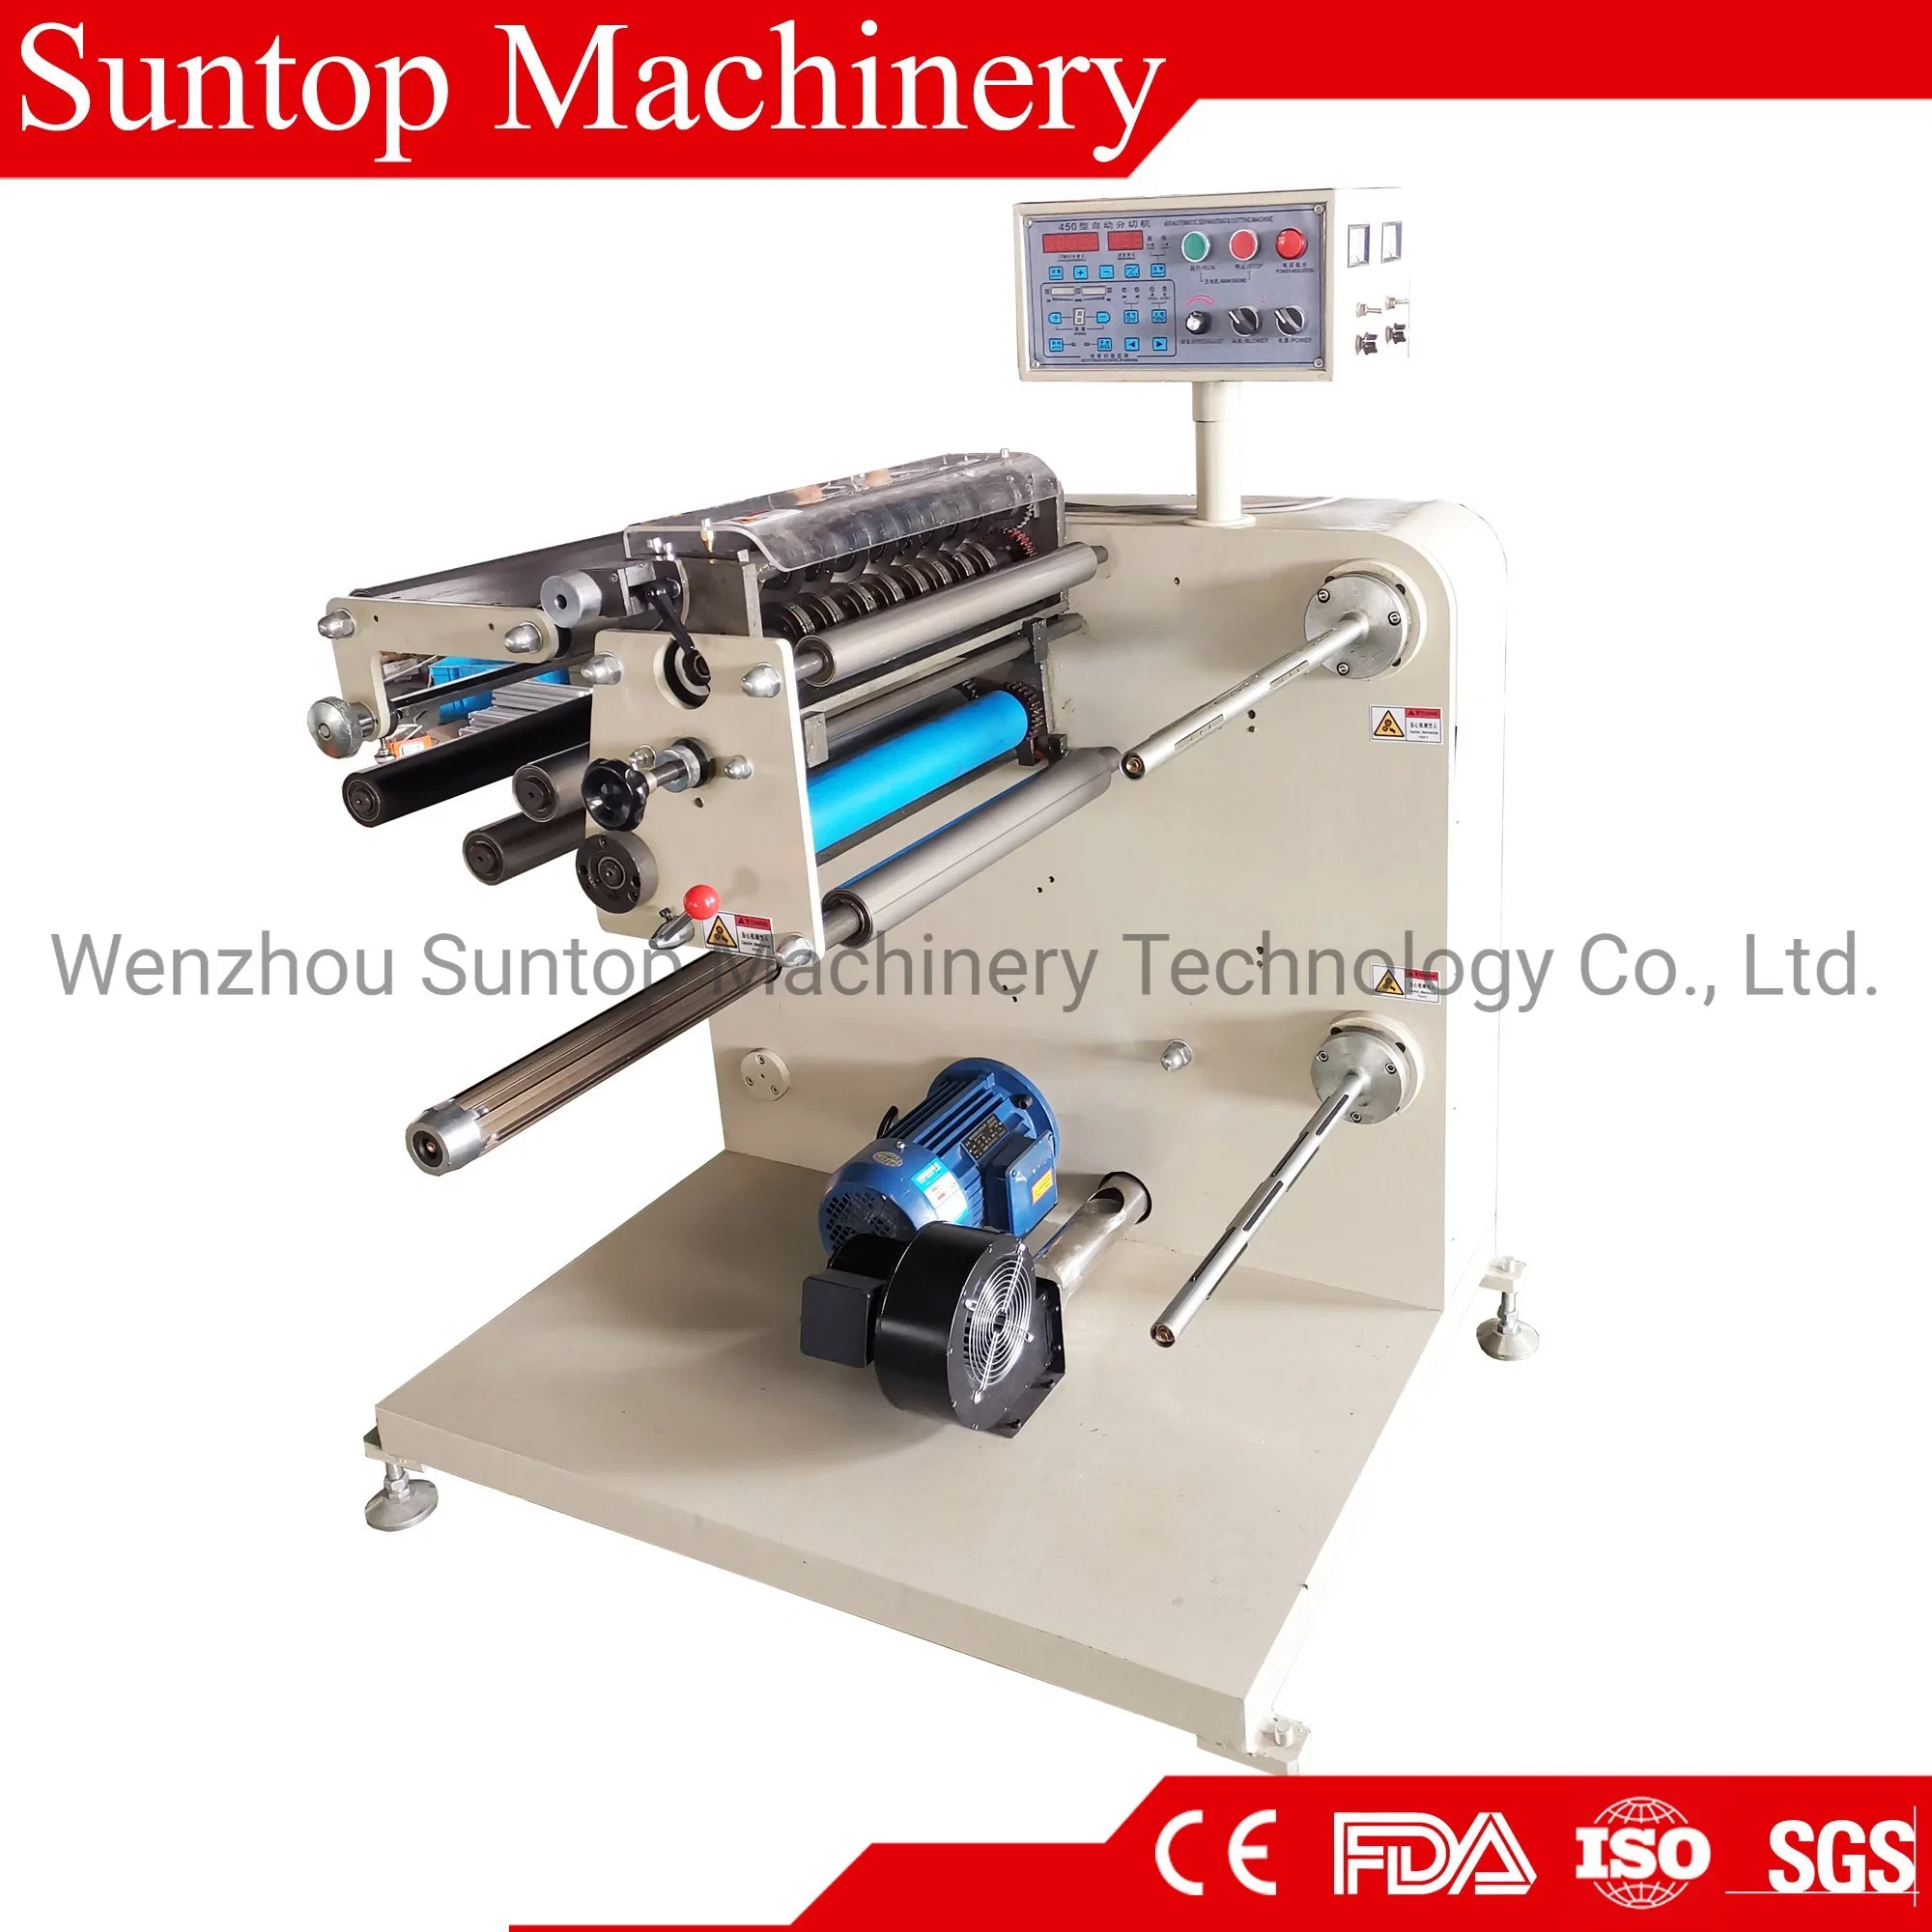 High Speed Laminating and Slitting Machine for Paper and Film Slitting Cutting, Die, Foam, Film, Adhesive Cutting and Rewinding.